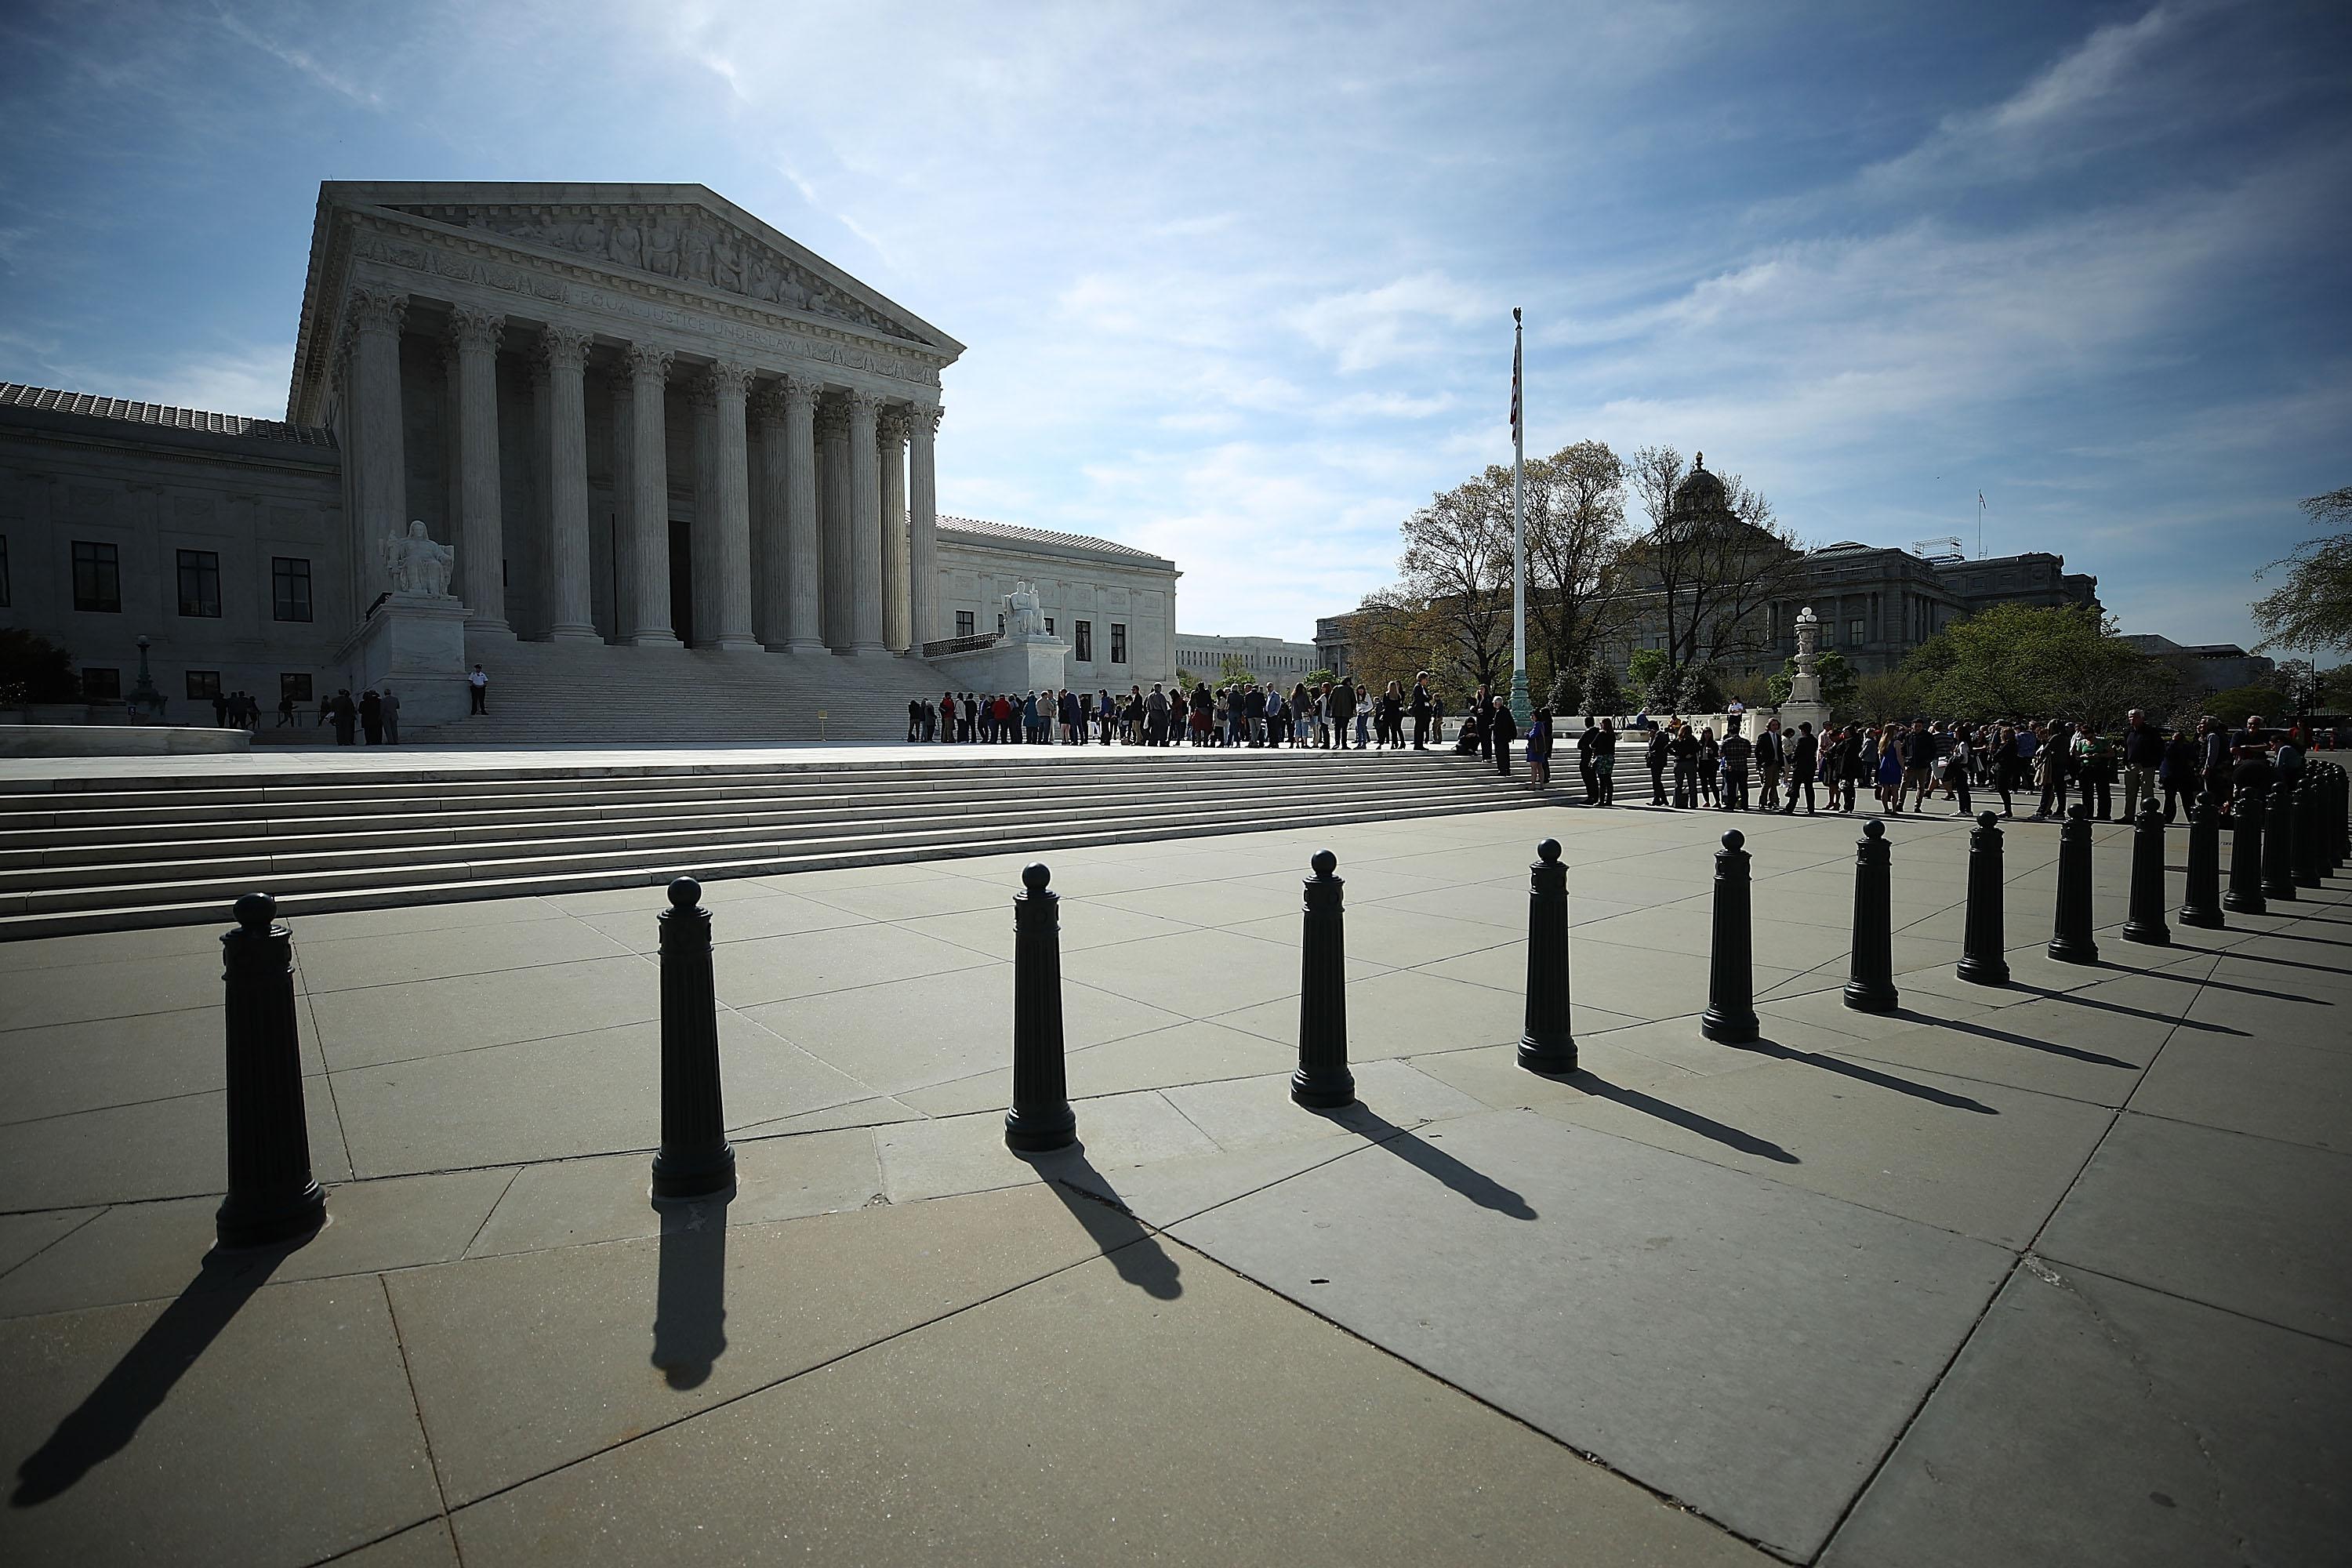 WASHINGTON, DC - APRIL 23: People wait in line to enter the U.S. Supreme Court, on April 23, 2018 in Washington, DC. Today the high court is hearing arguments in Chavez-Mesa v. US, which concerns a technical matter regarding sentencing guidelines. Deputy Attorney General Rod Rosenstein will be representing the government. (Photo by Mark Wilson/Getty Images)